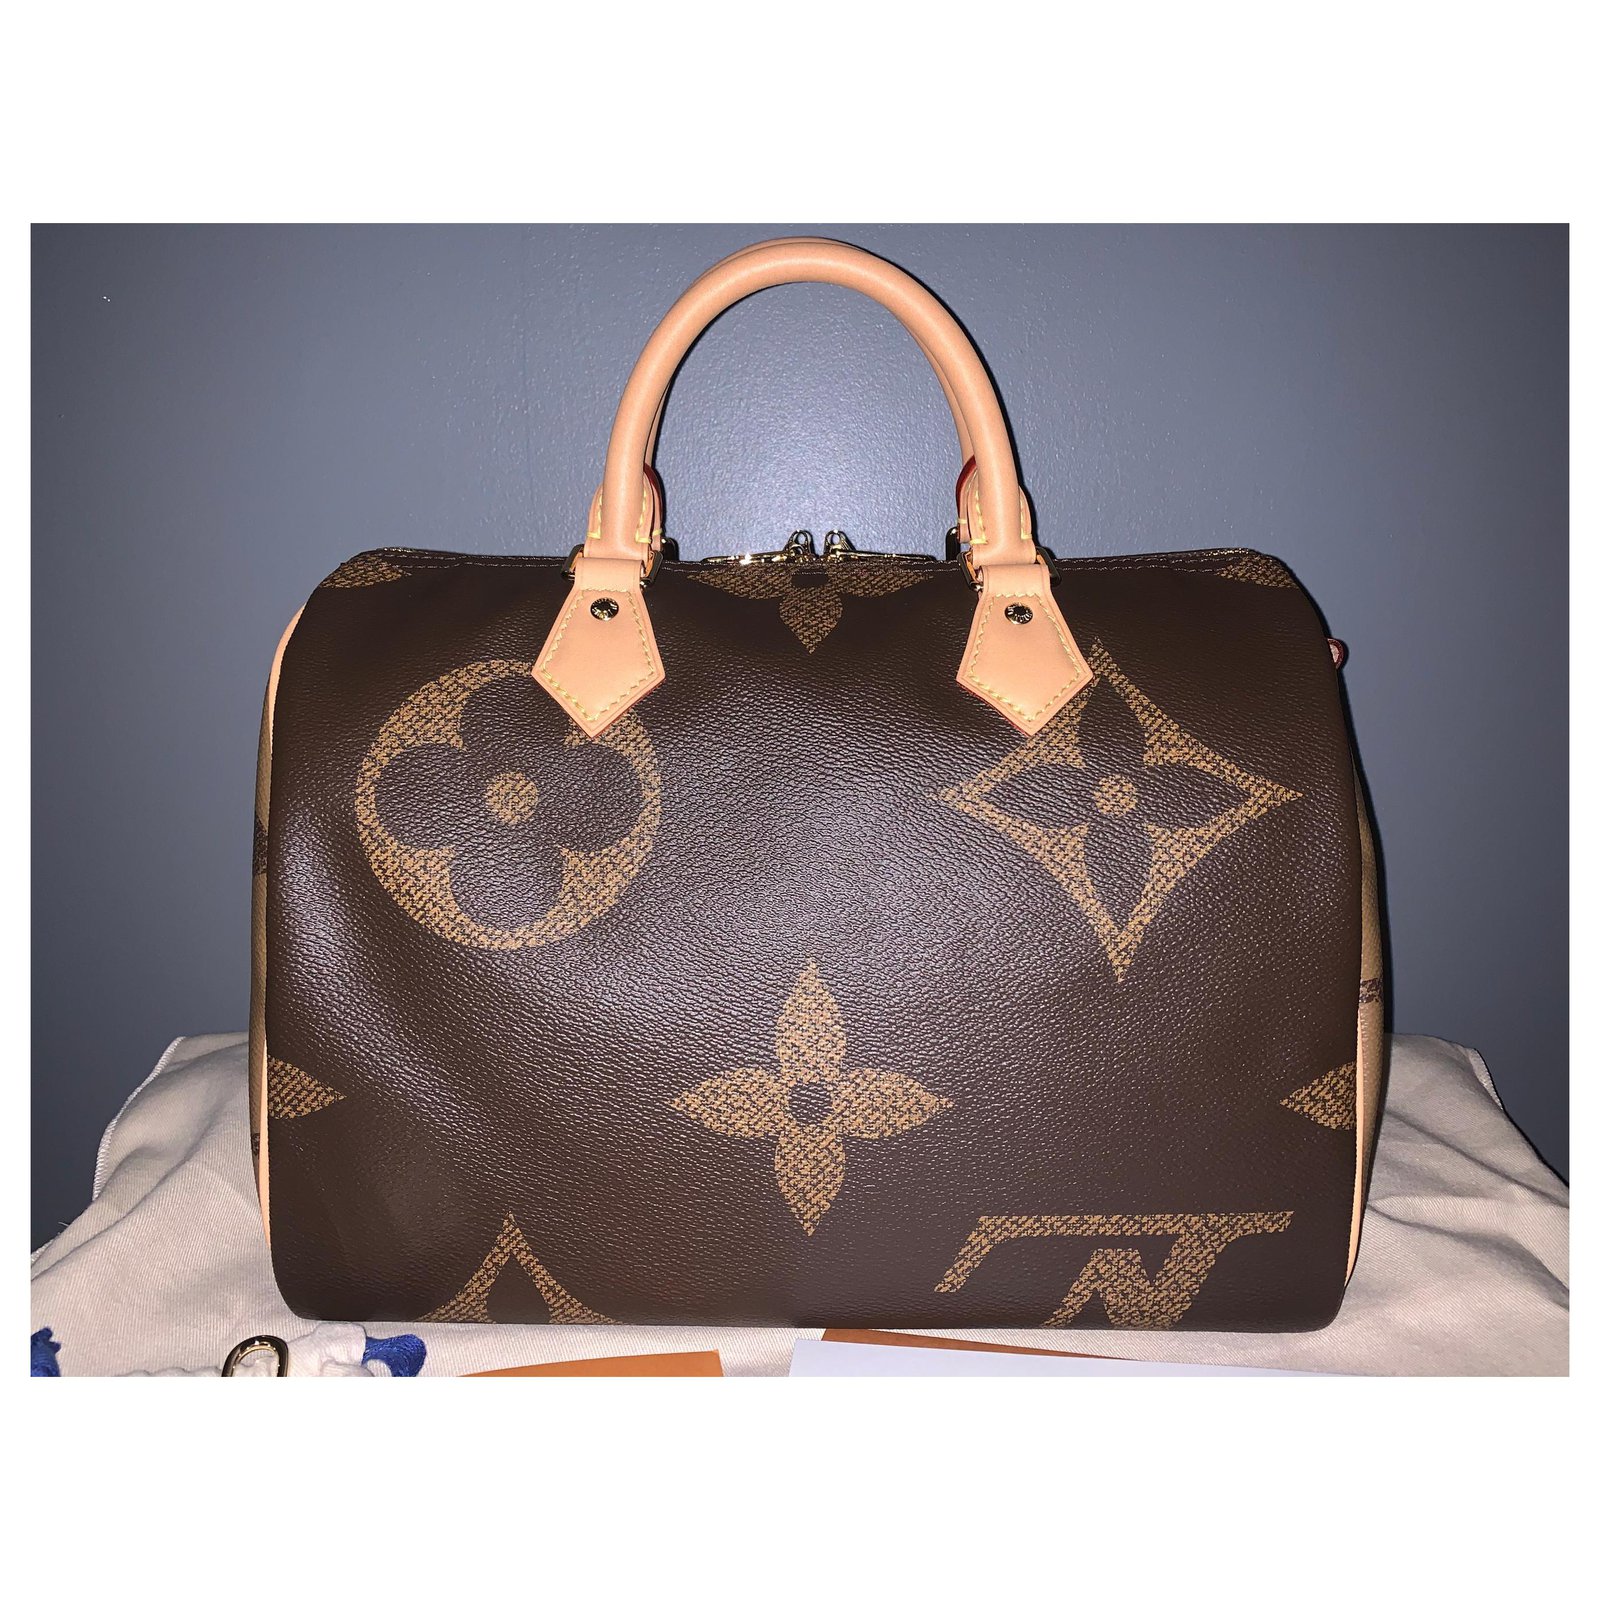 Louis Vuitton Reverse Monogram Giant Capsule Collection - Spotted Fashion